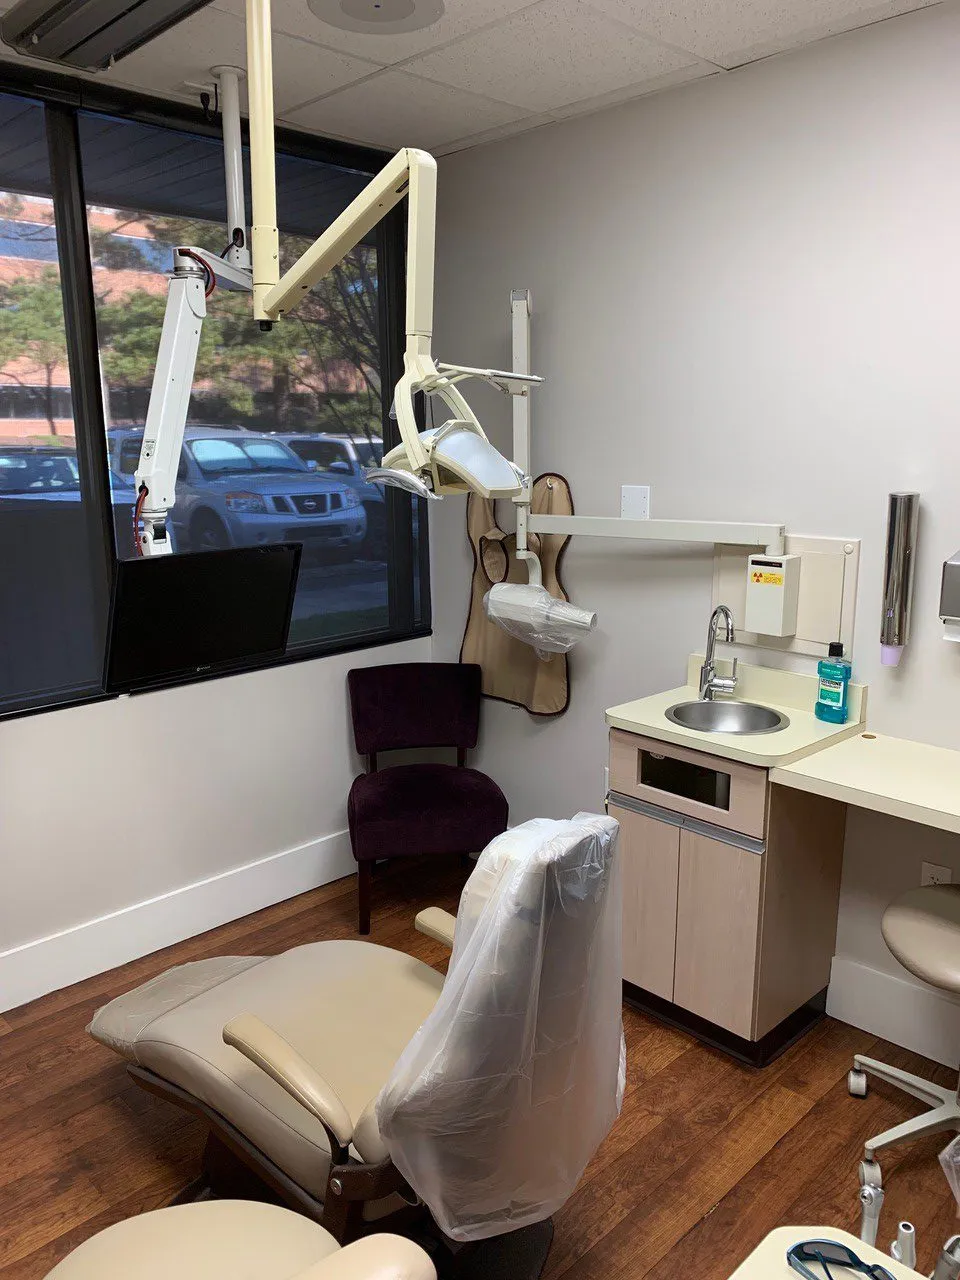 The dental suite of the croasdaile smiles office